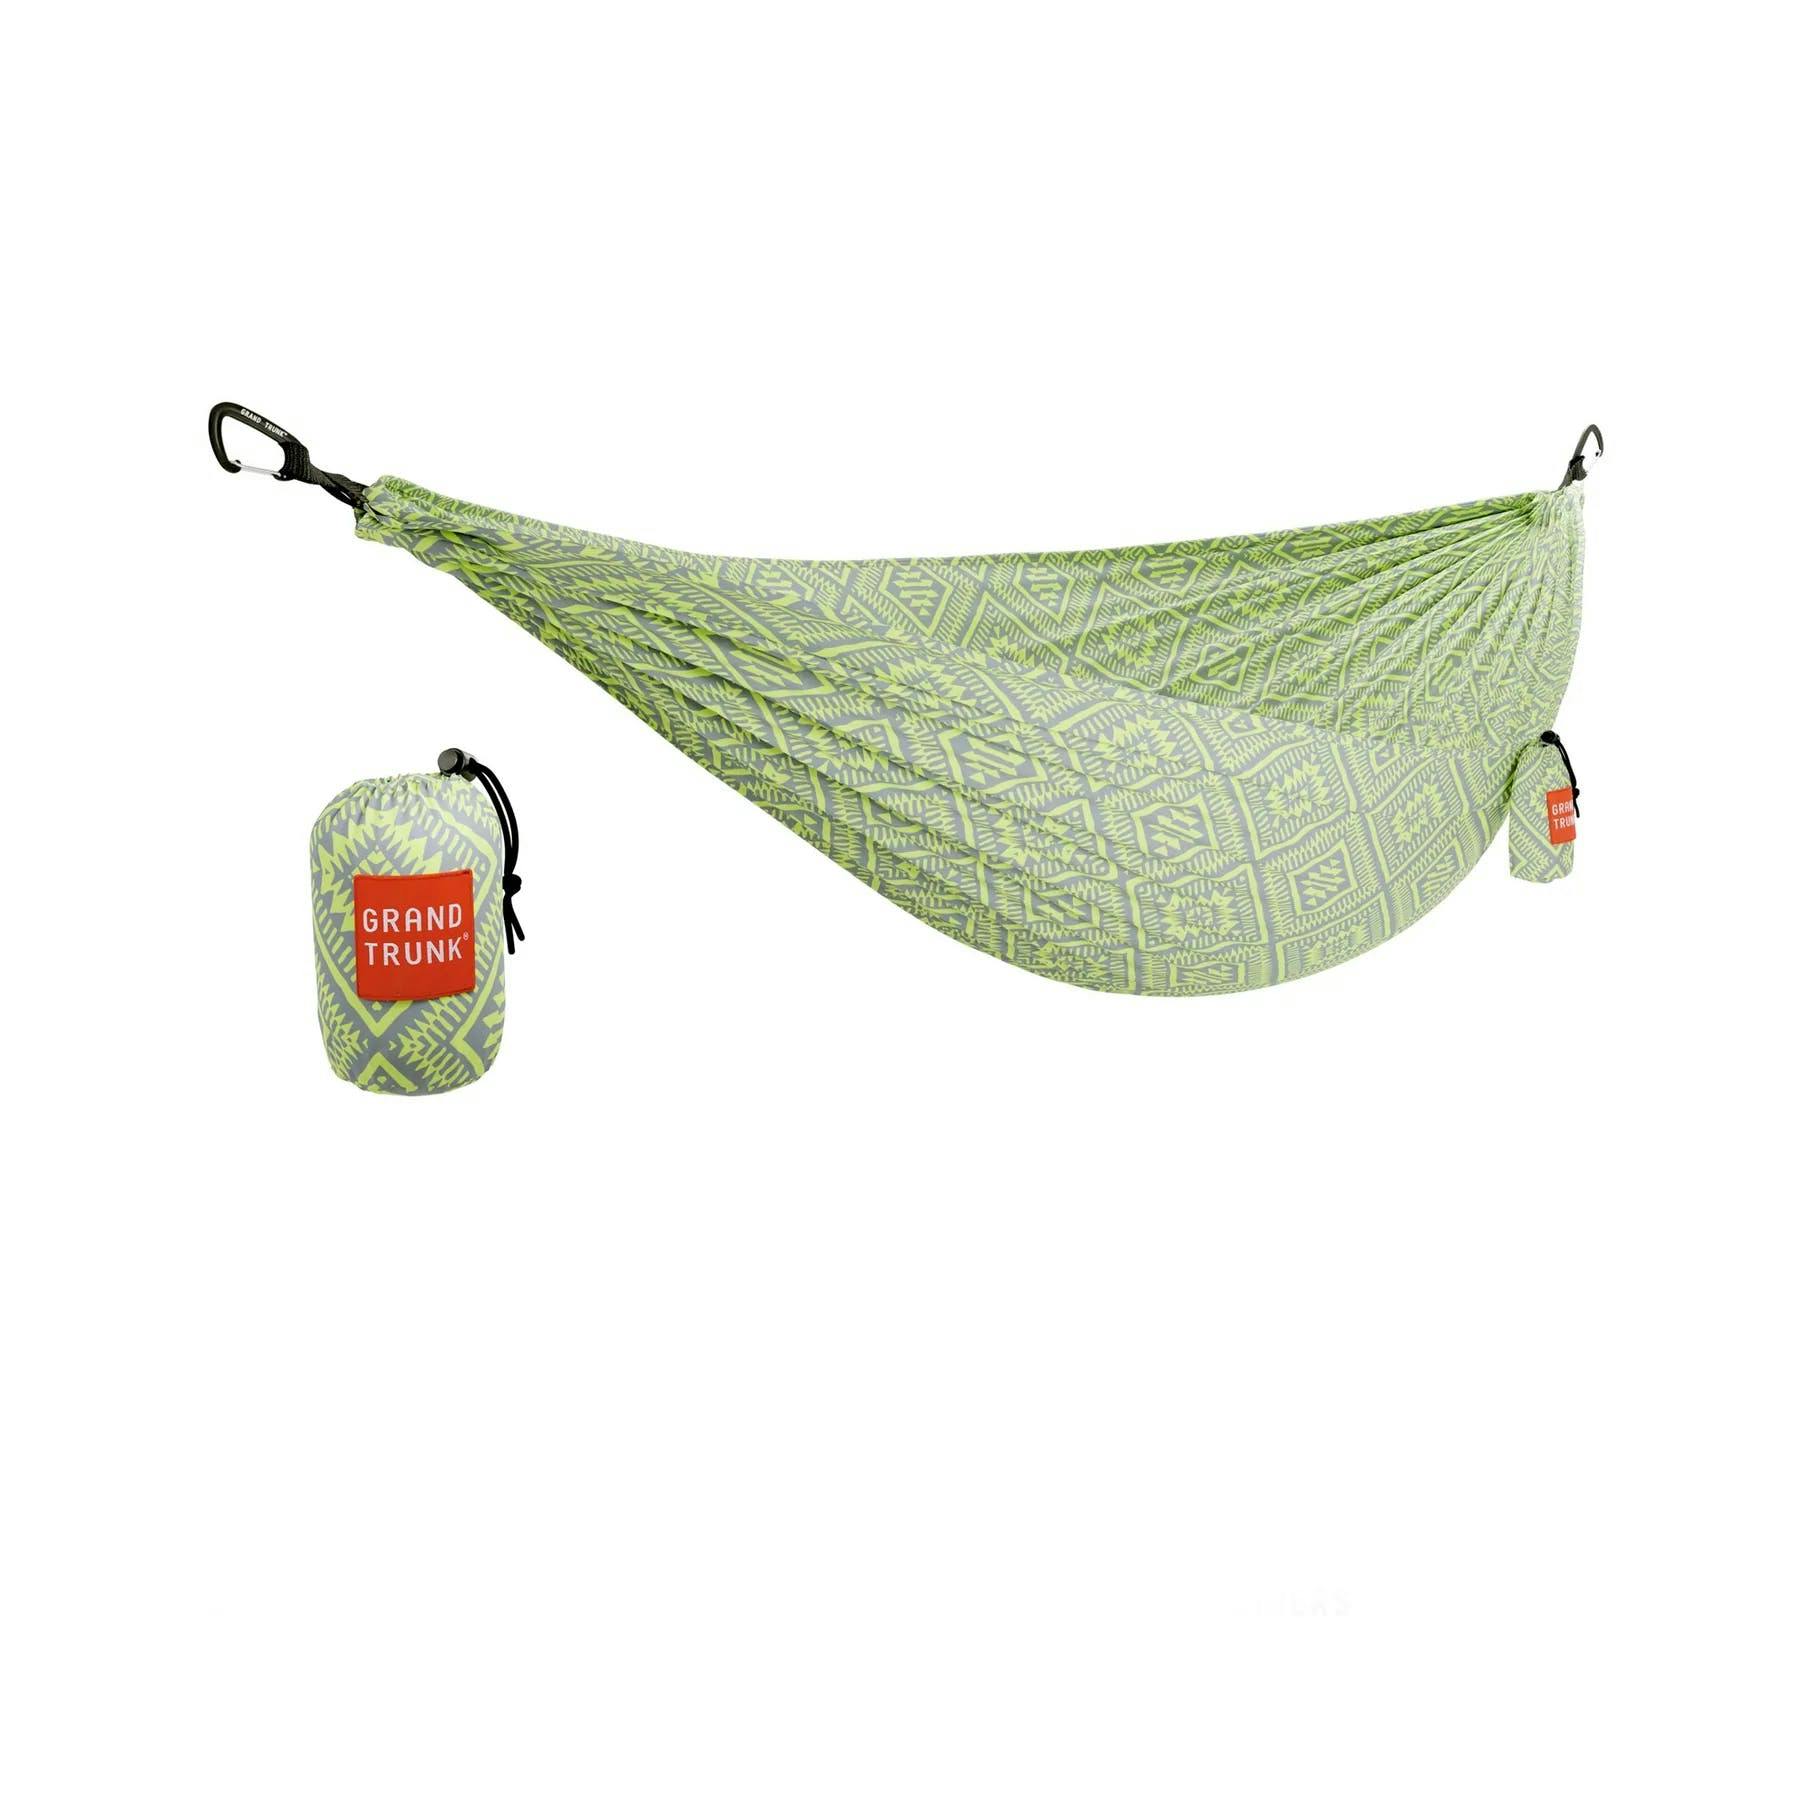 Grand Trunk Trunktech Double Printed Hammock